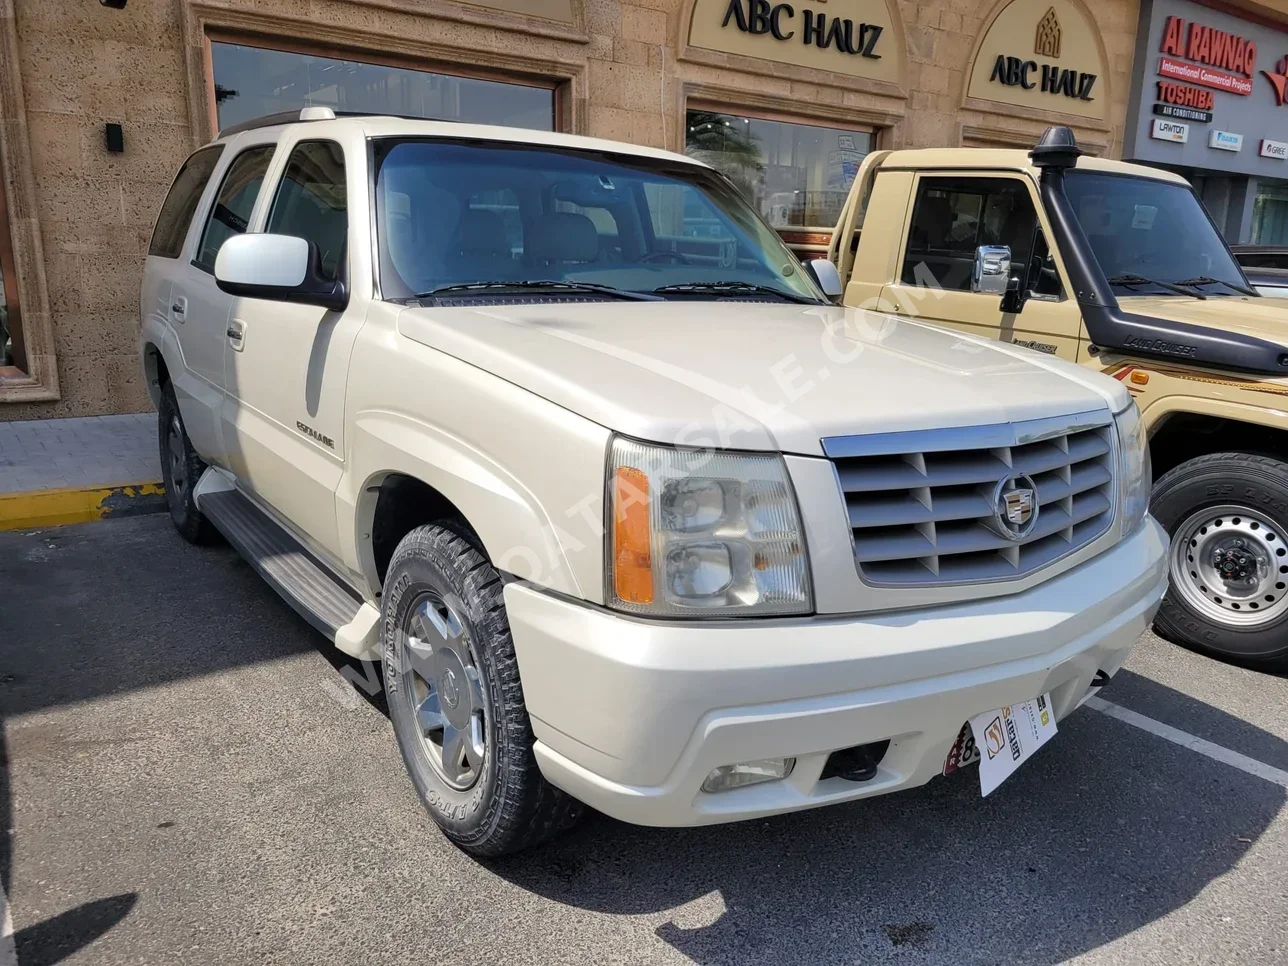 Cadillac  Escalade  2005  Automatic  182,000 Km  8 Cylinder  Four Wheel Drive (4WD)  SUV  White